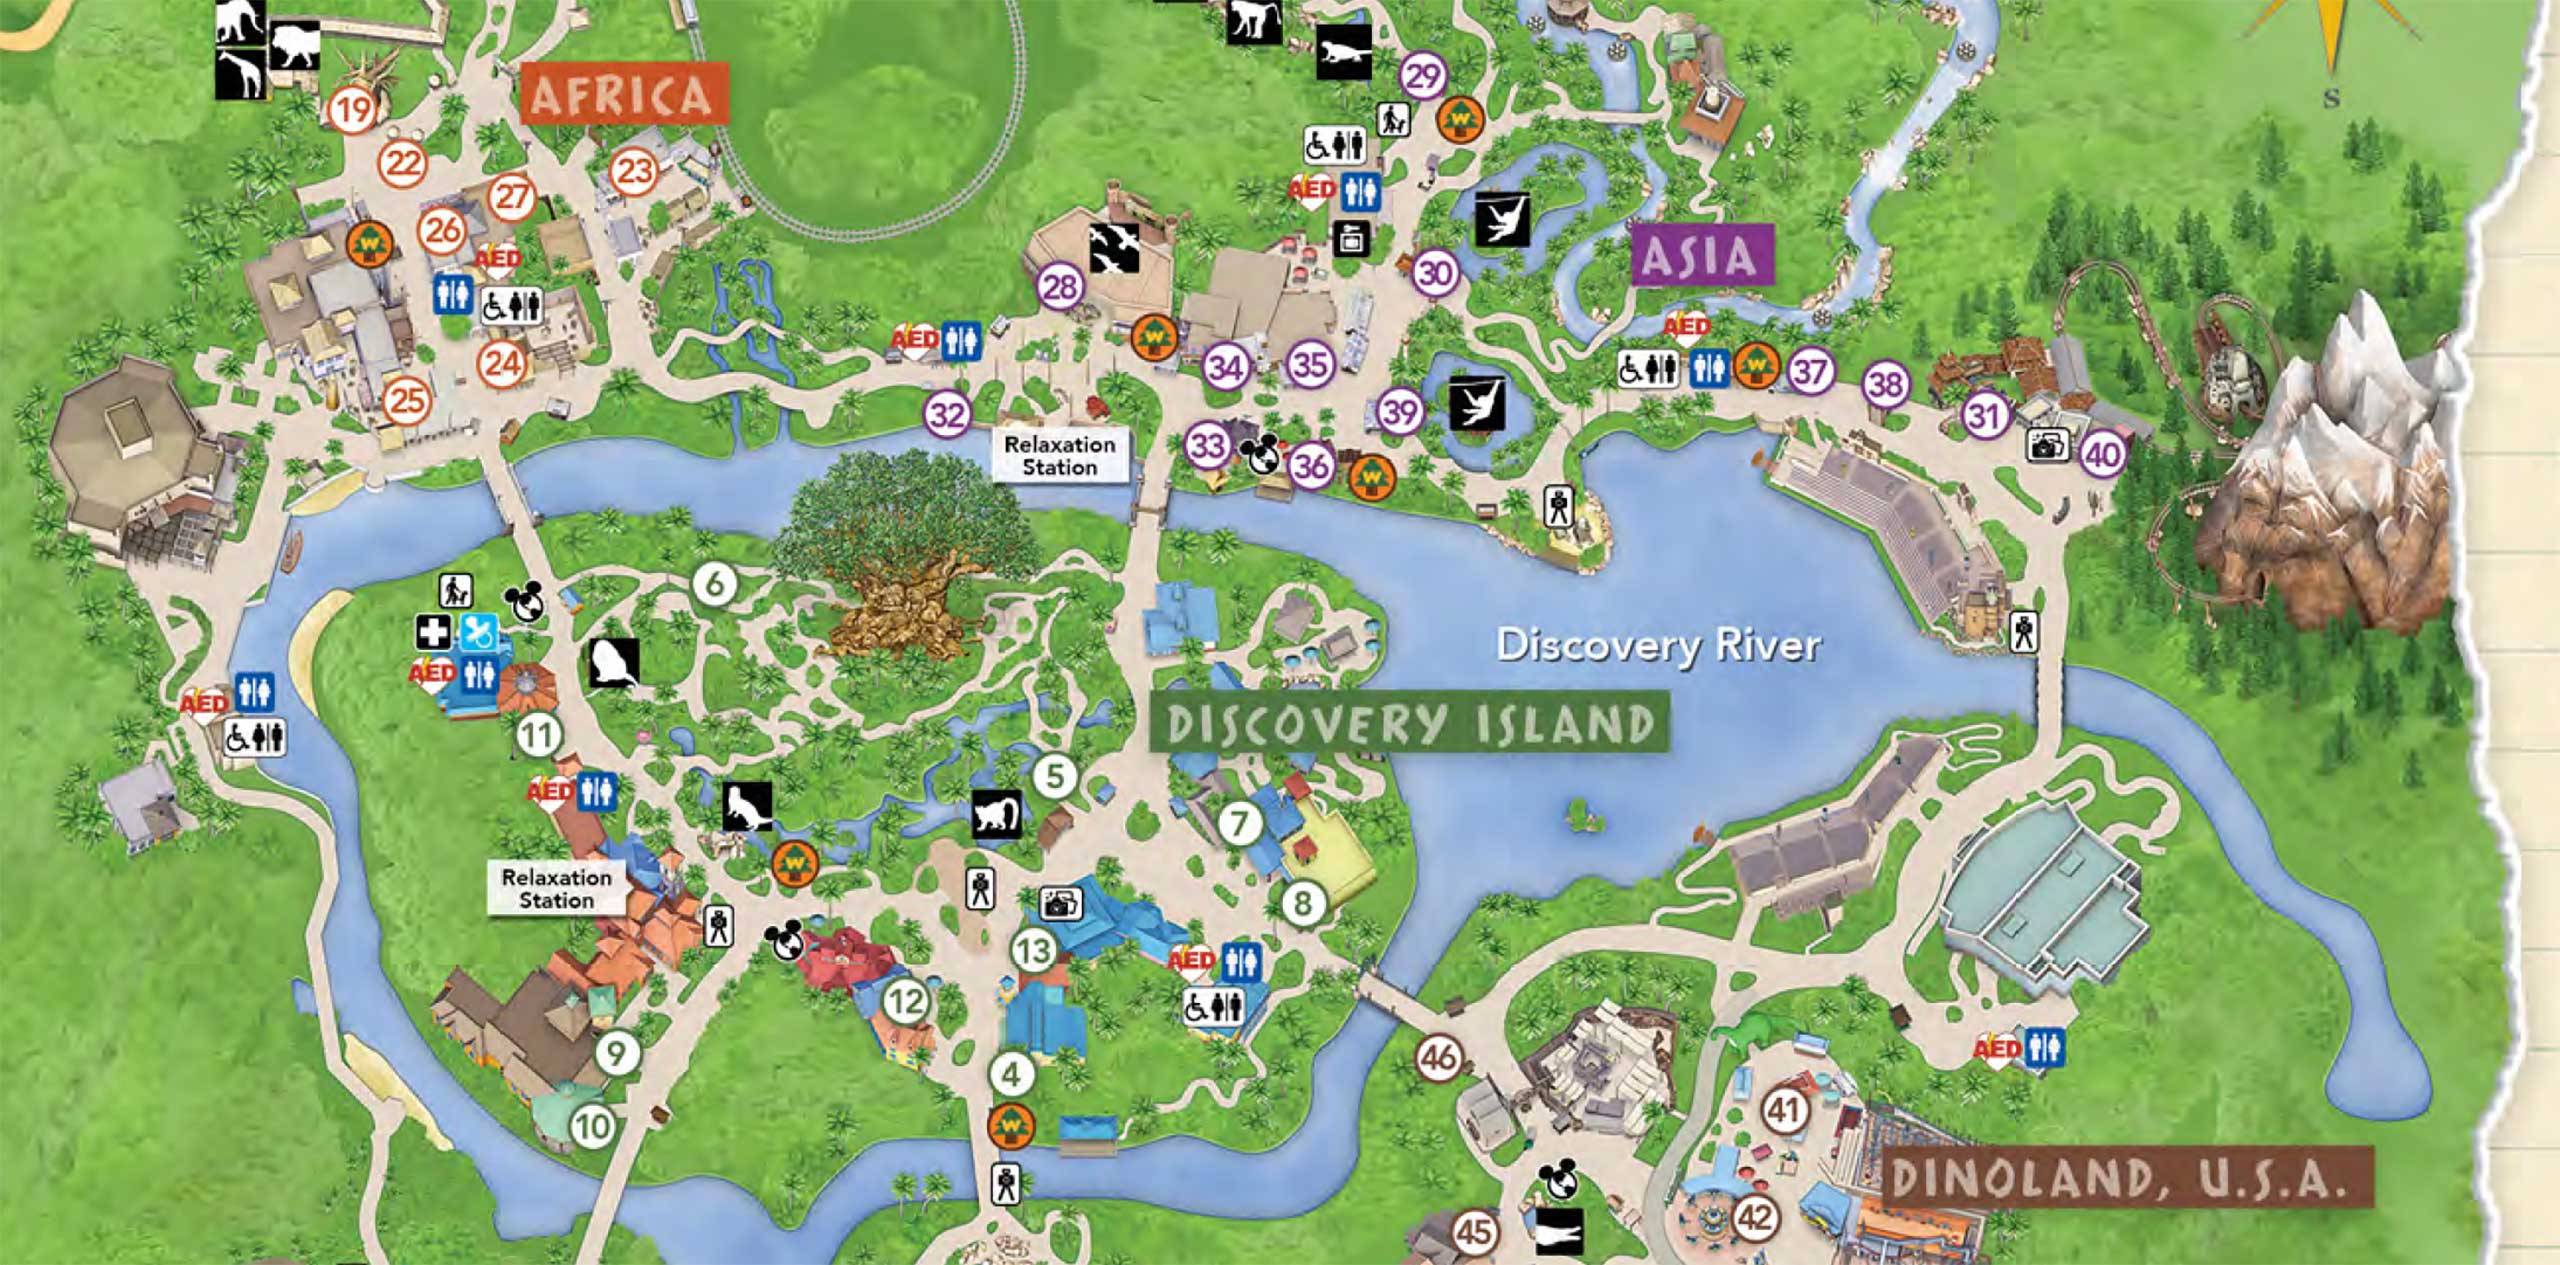 PHOTOS - New guide map at Disney's Animal Kingdom removes any mention of Festival of the Lion King and Finding Nemo - The Musical